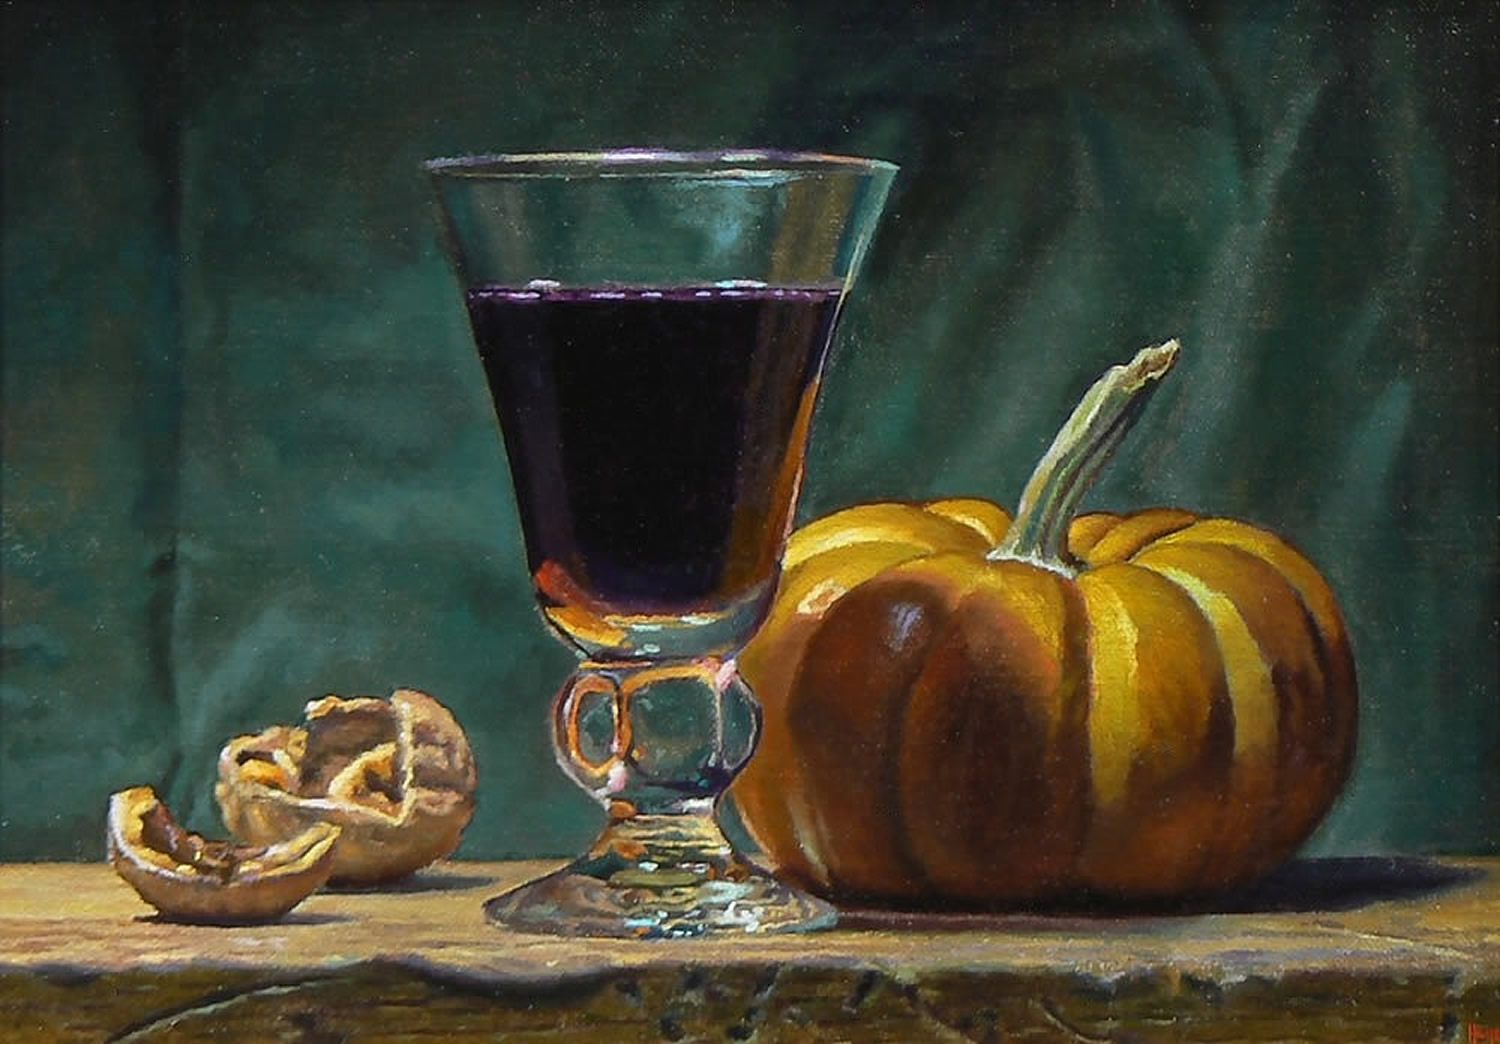 "Walnuts, Wine, Pumpkin"
Outer dimensions with frame, 13x16 inches